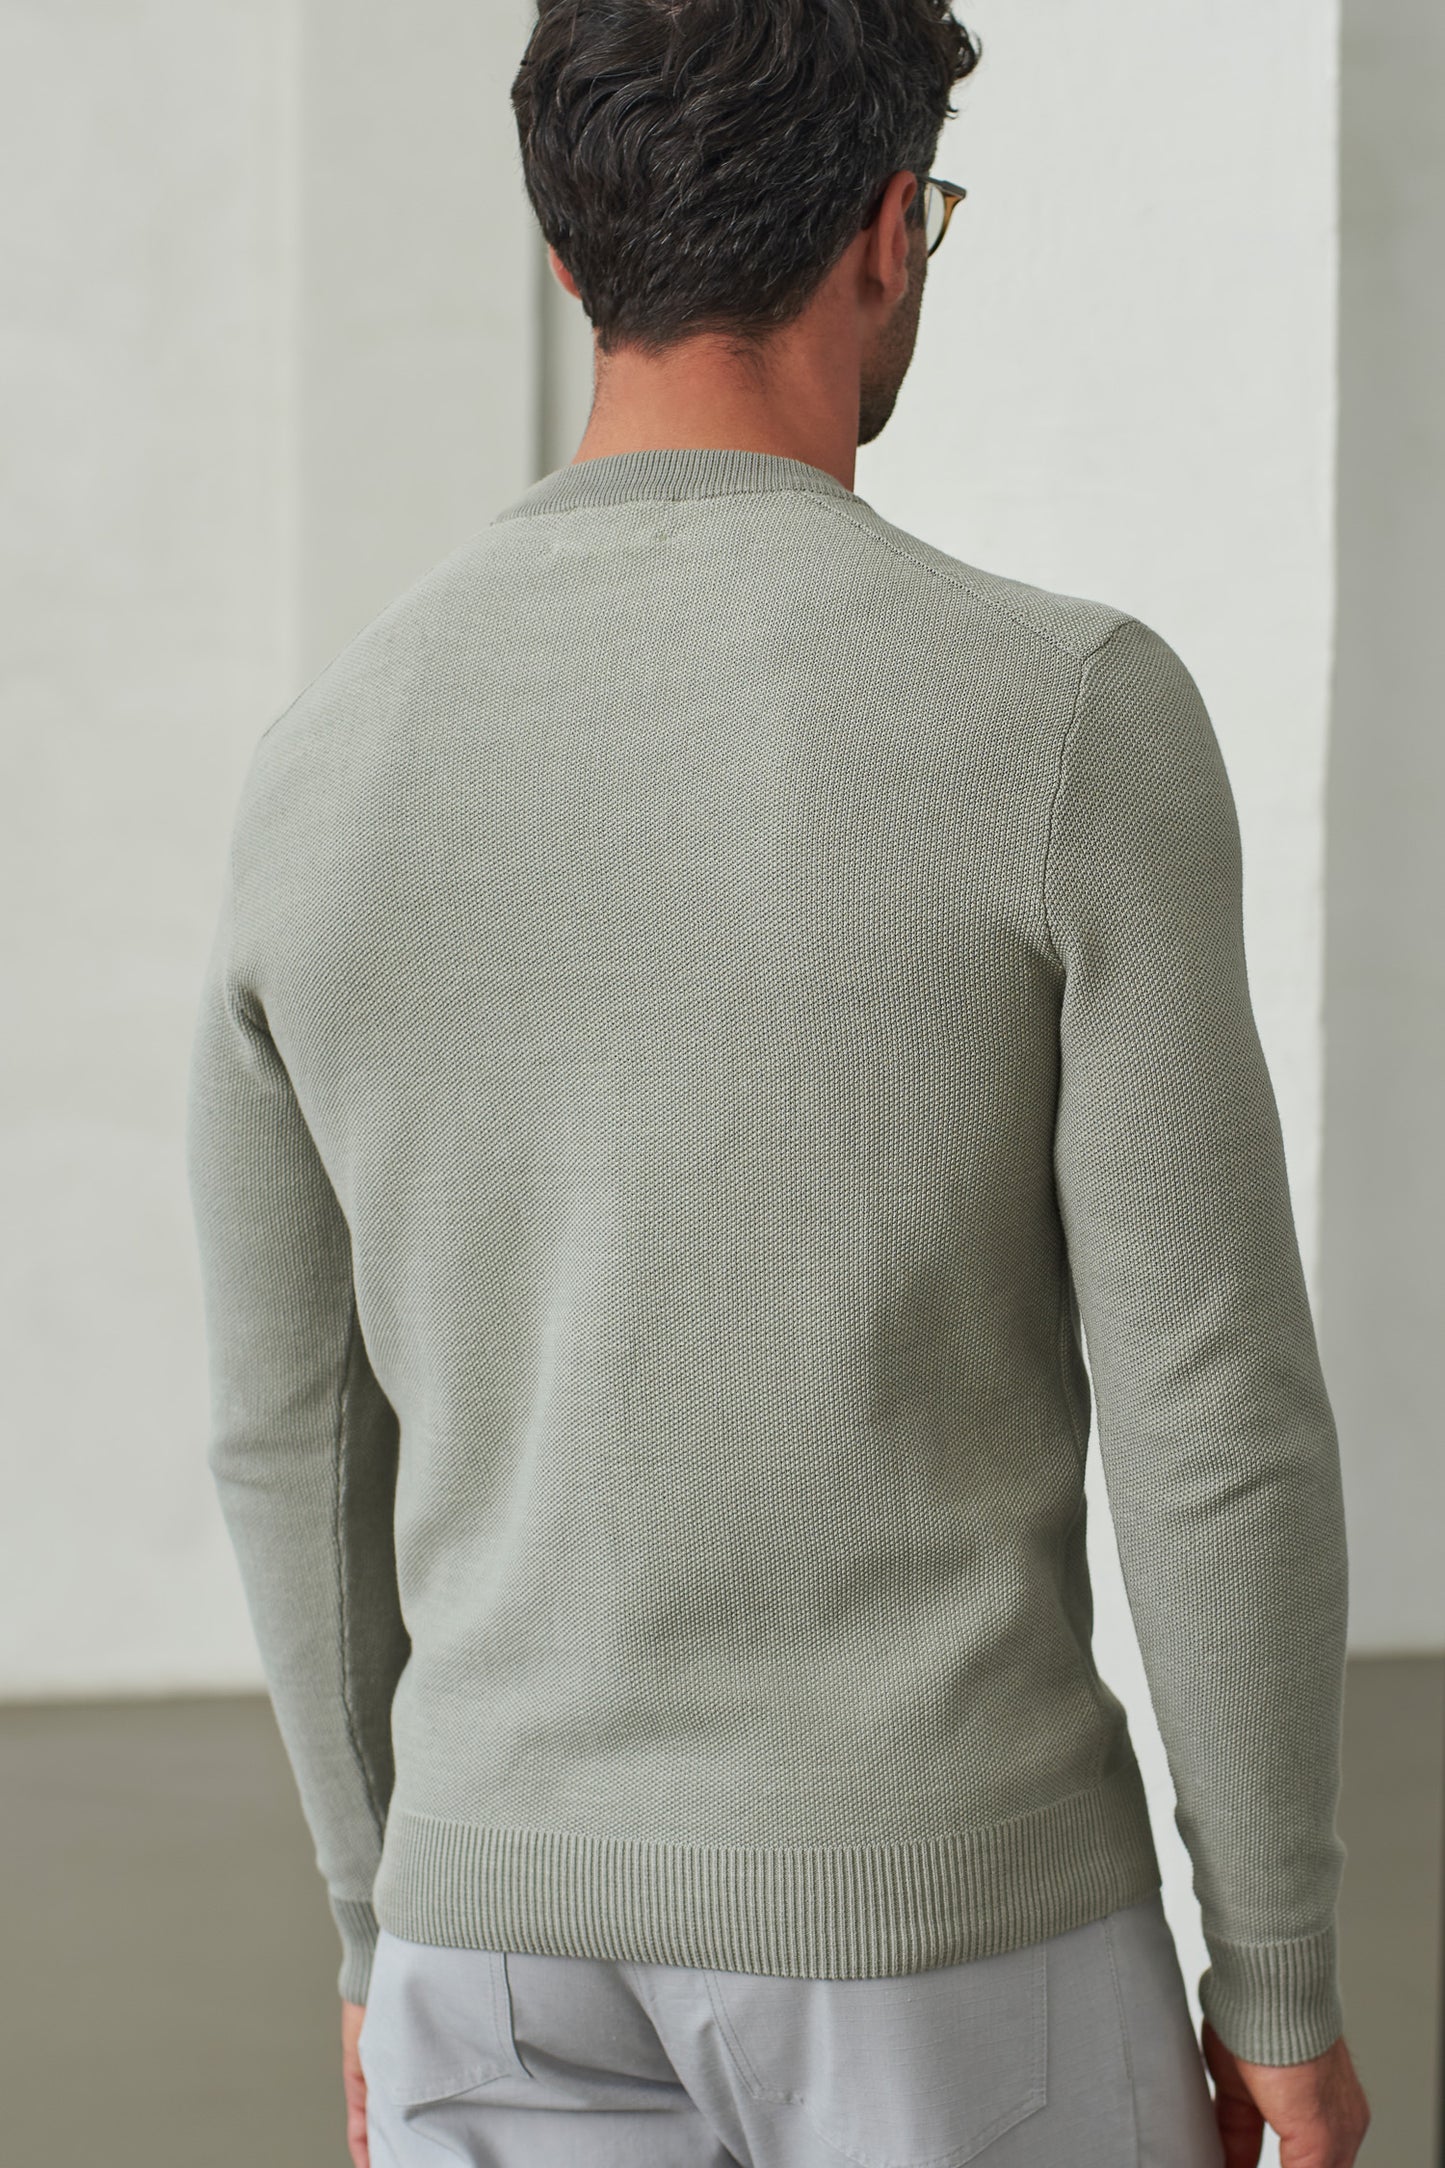 About Companions - MORTEN jumper eco knotted reed